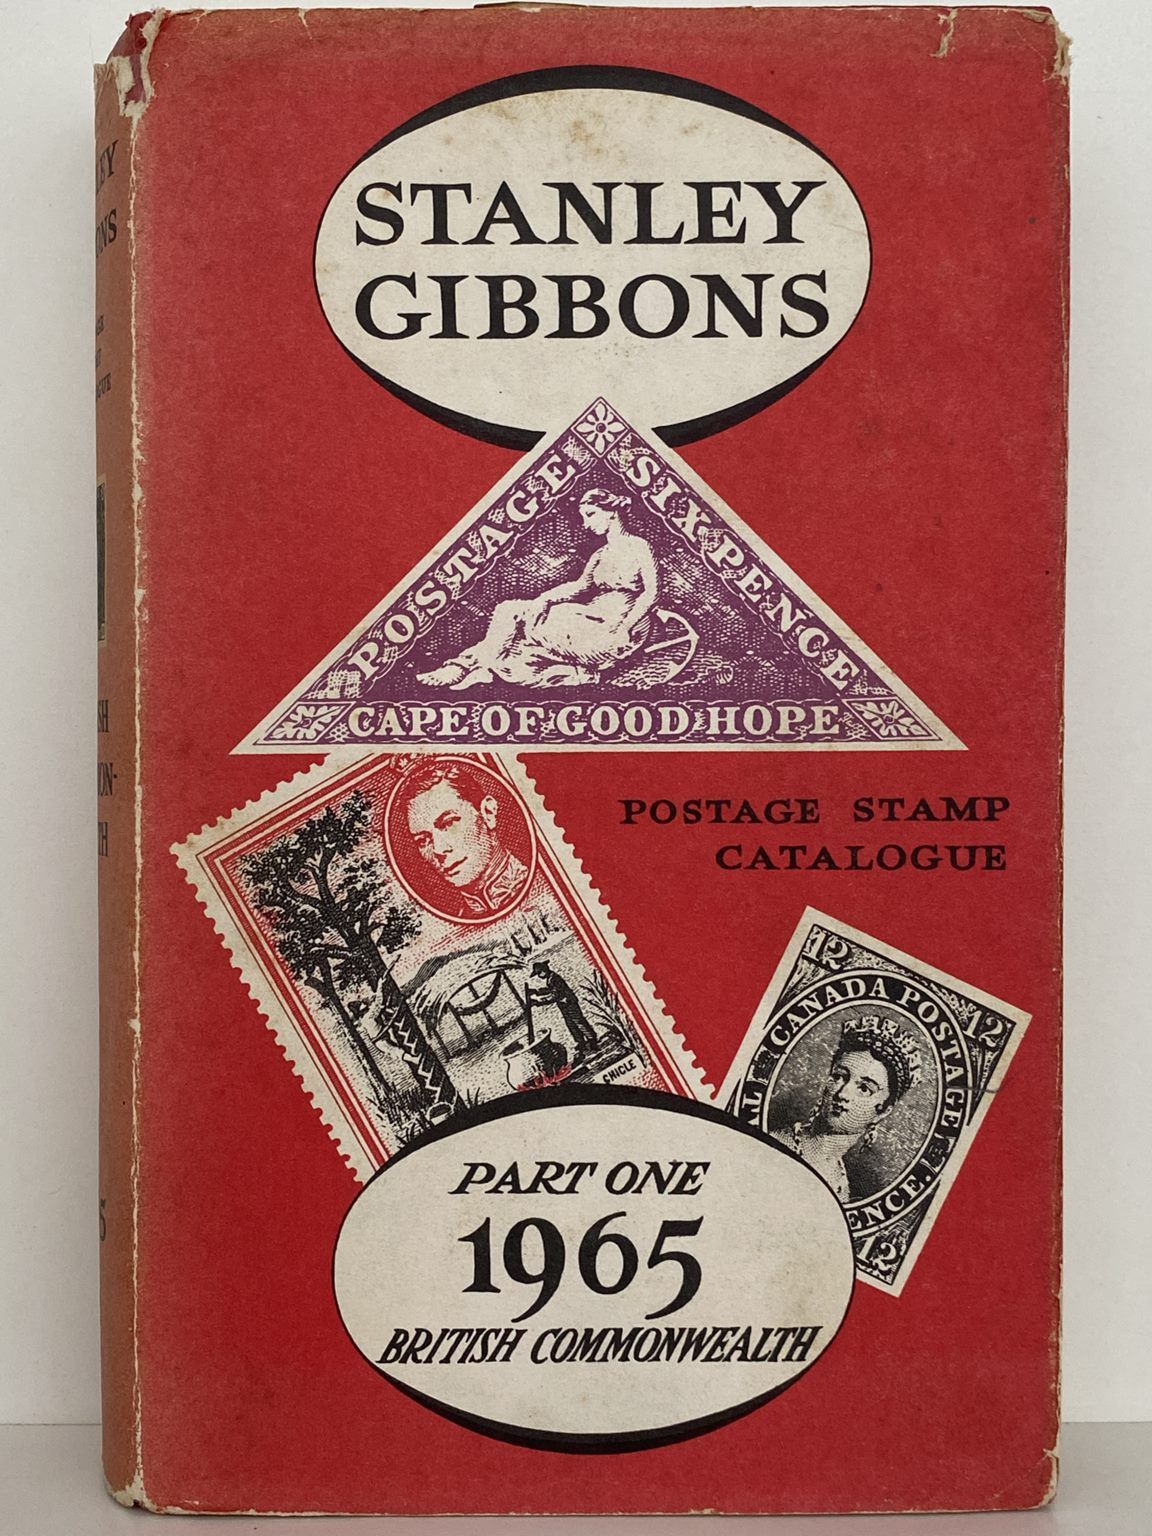 STANLEY GIBBONS Postage Stamp Catalogue - Part 1 British Commonwealth 1965